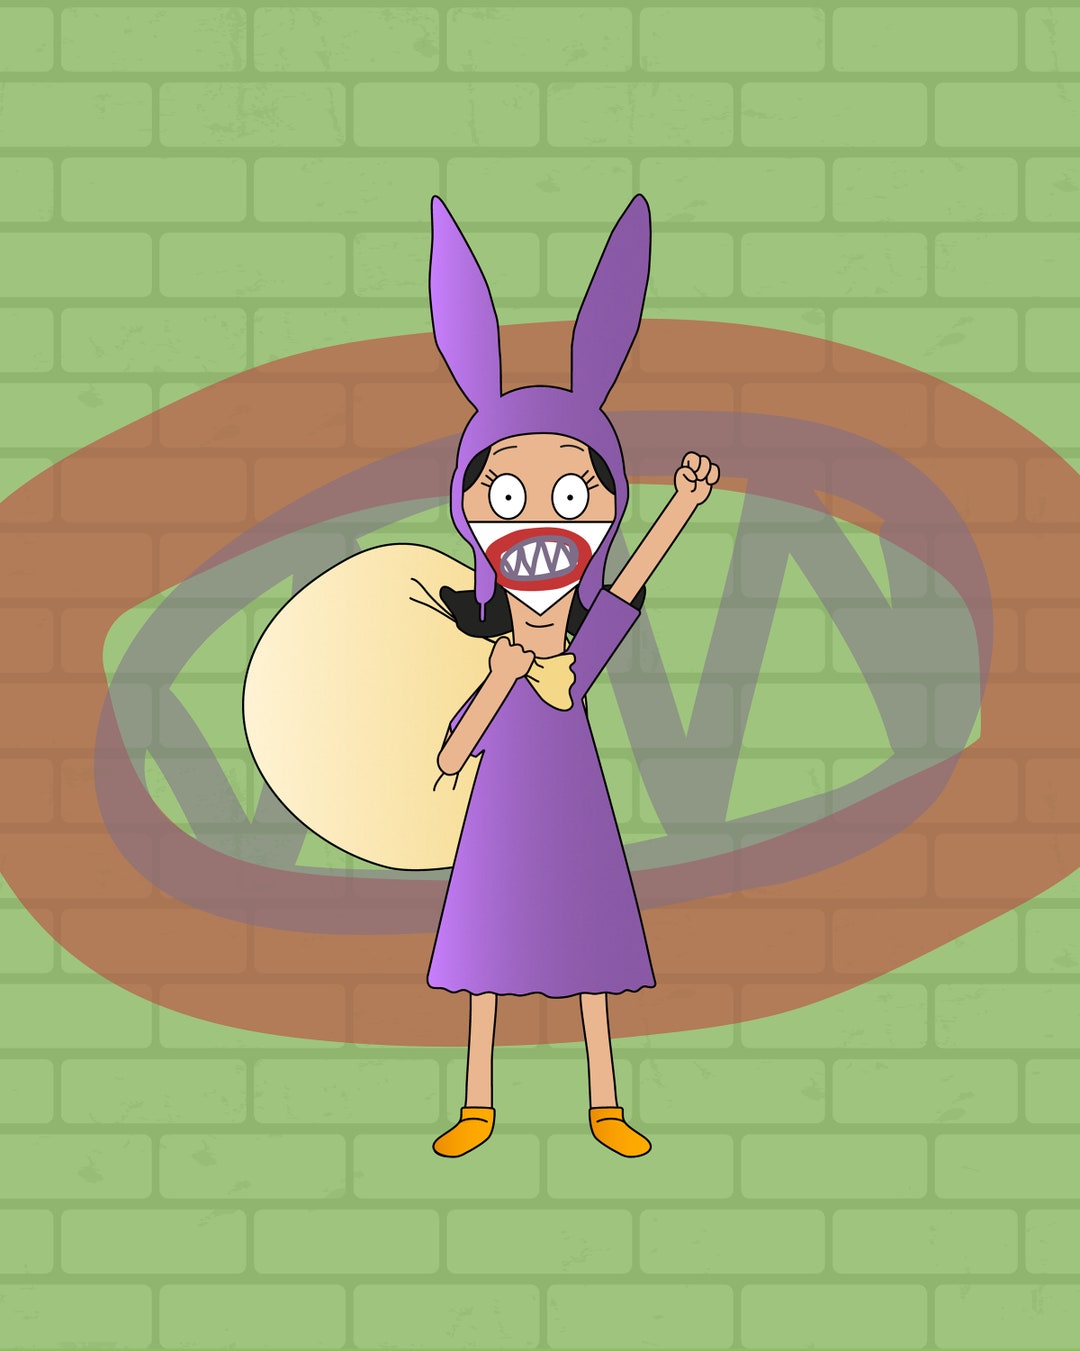 Bob's Burgers Louise Belcher I Smell Fear On You Backpack